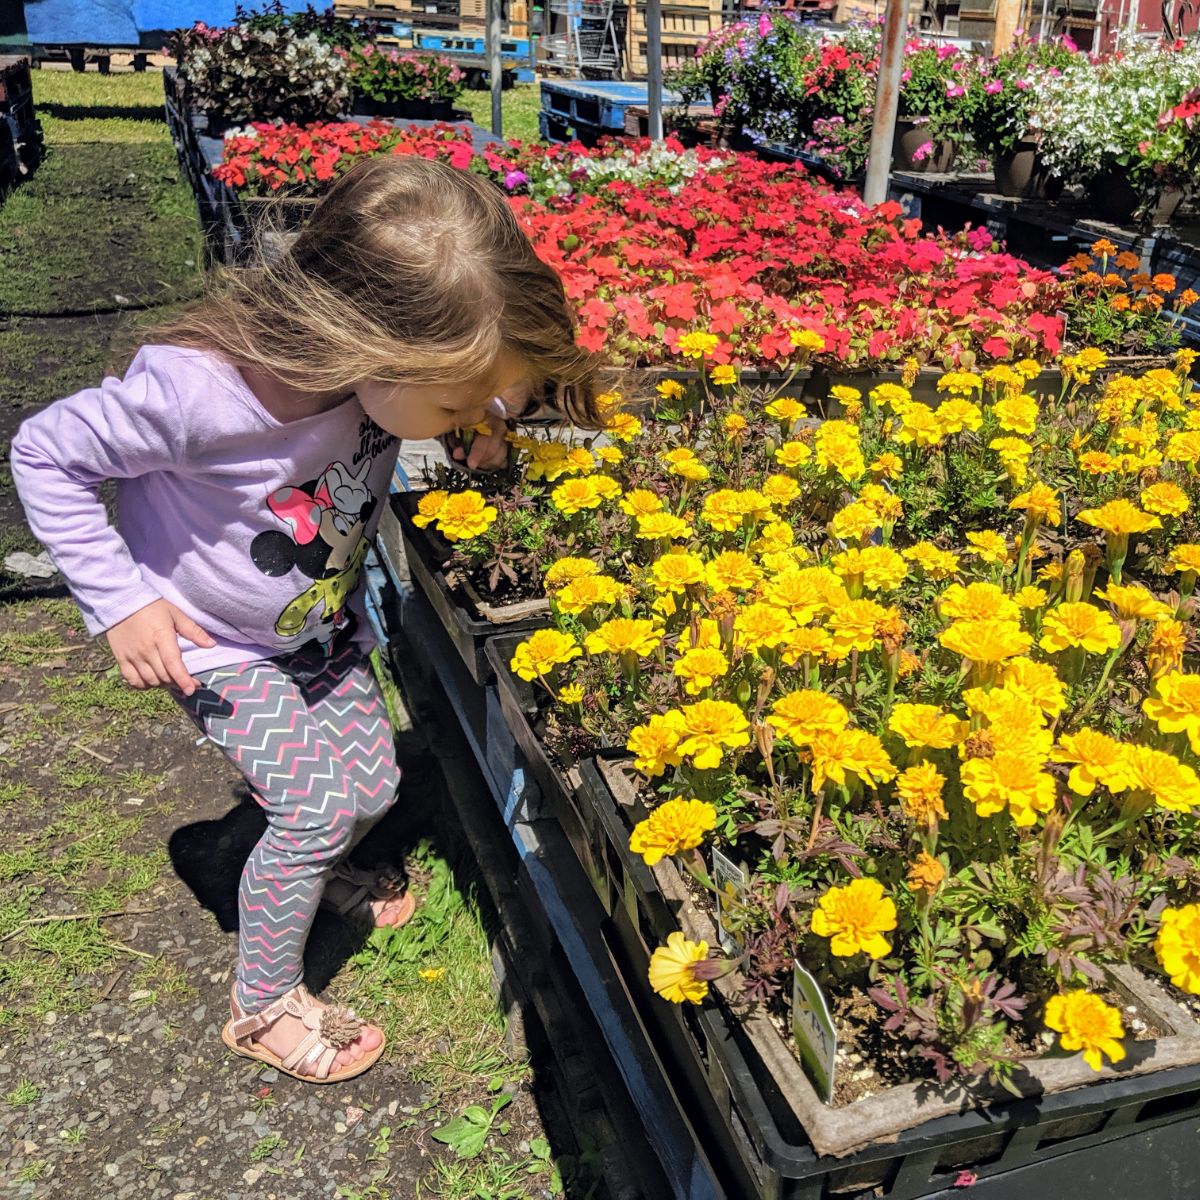 Large Tray of Yellow Marigolds for Sale, Little Girl Sniffing Flowers